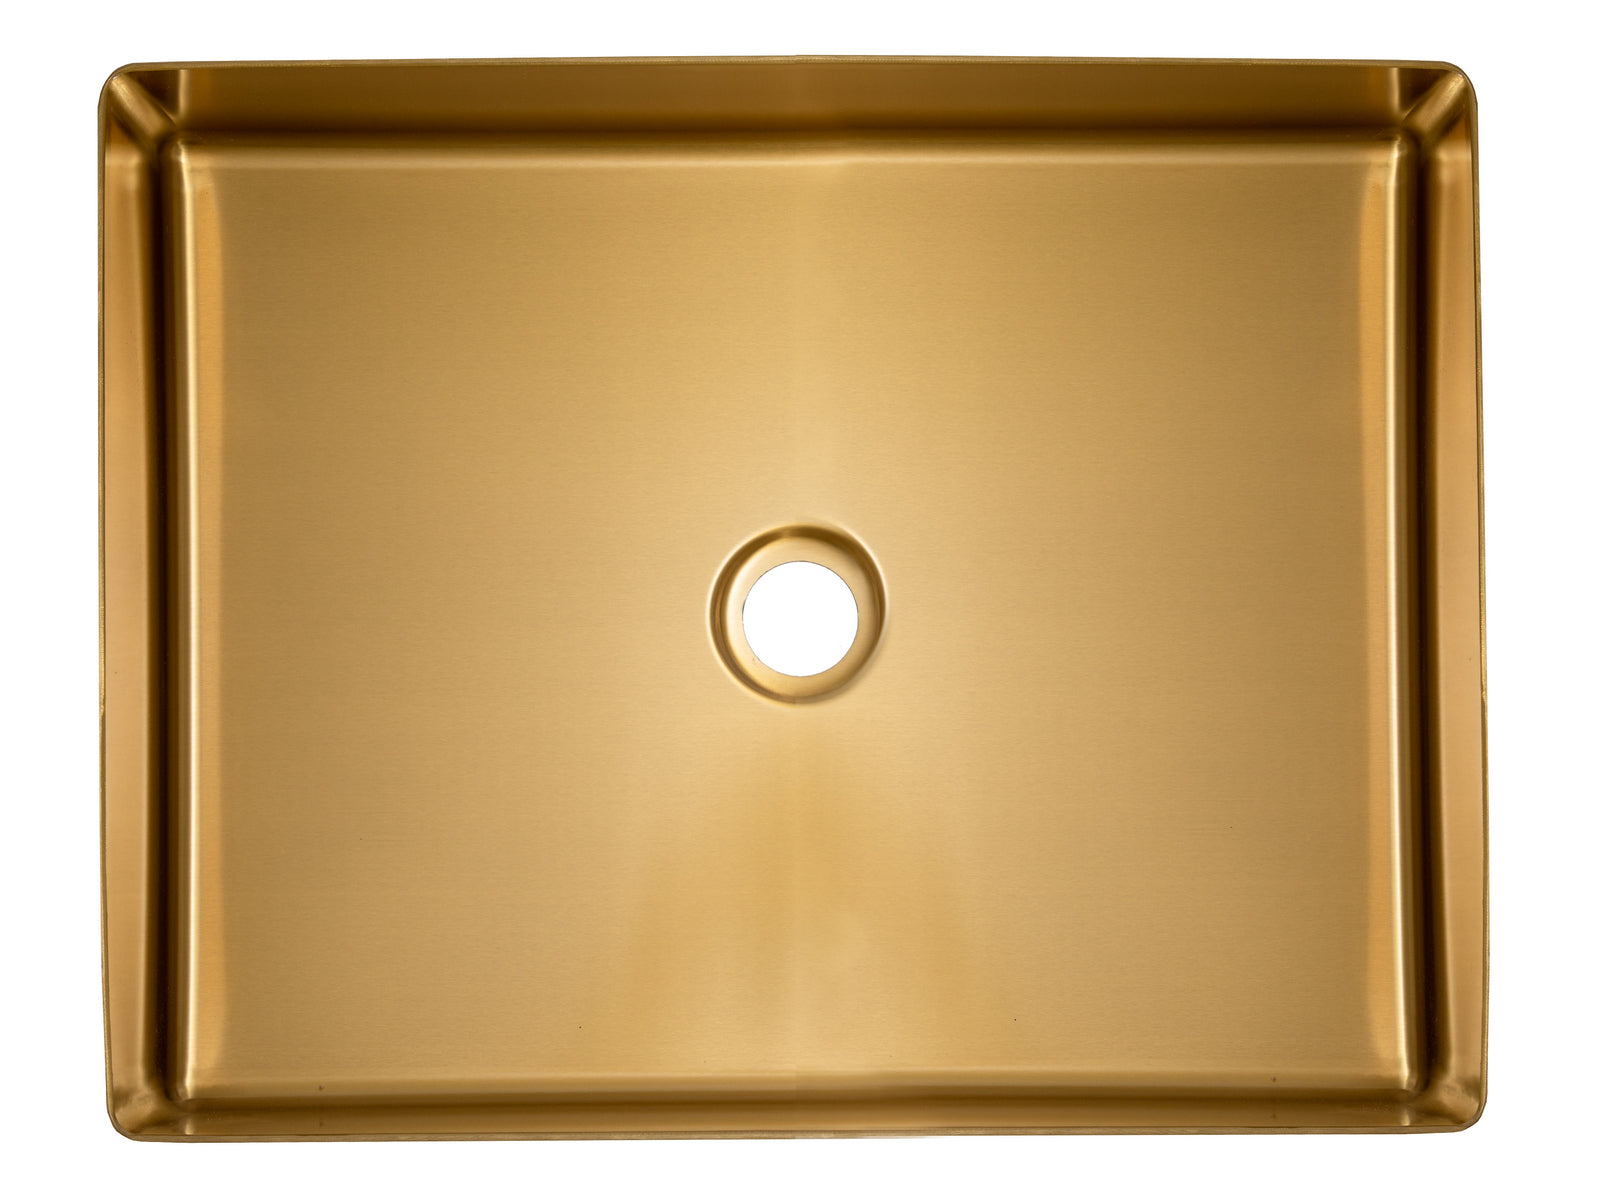 Rectangular 19" x 14 1/2" Stainless Steel Bathroom Vessel Sink with Drain in Gold